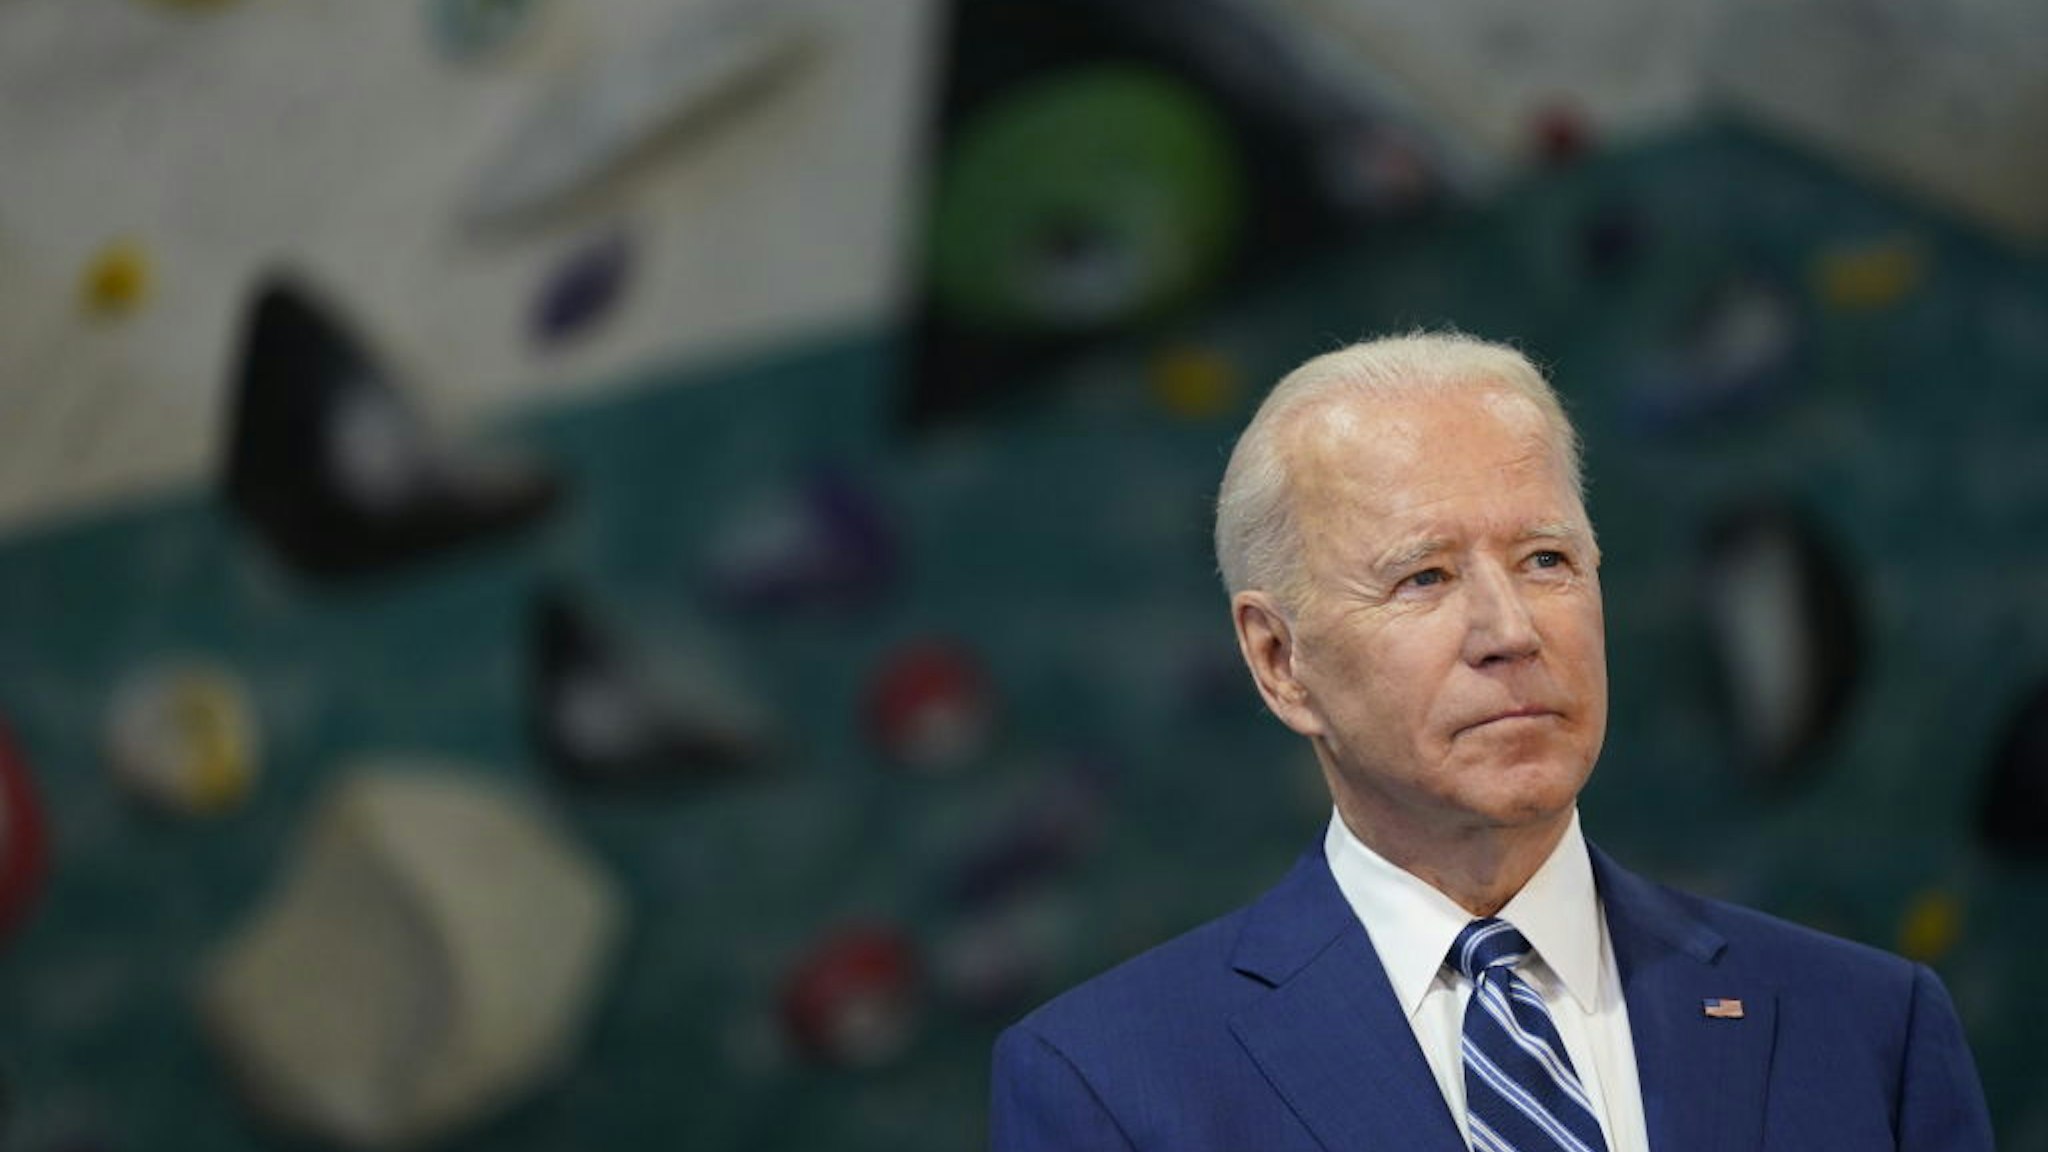 U.S. President Joe Biden pauses while speaking at Sportrock Climbing Center during an event in Alexandria, Virginia, U.S., on Friday, May 28, 2021.